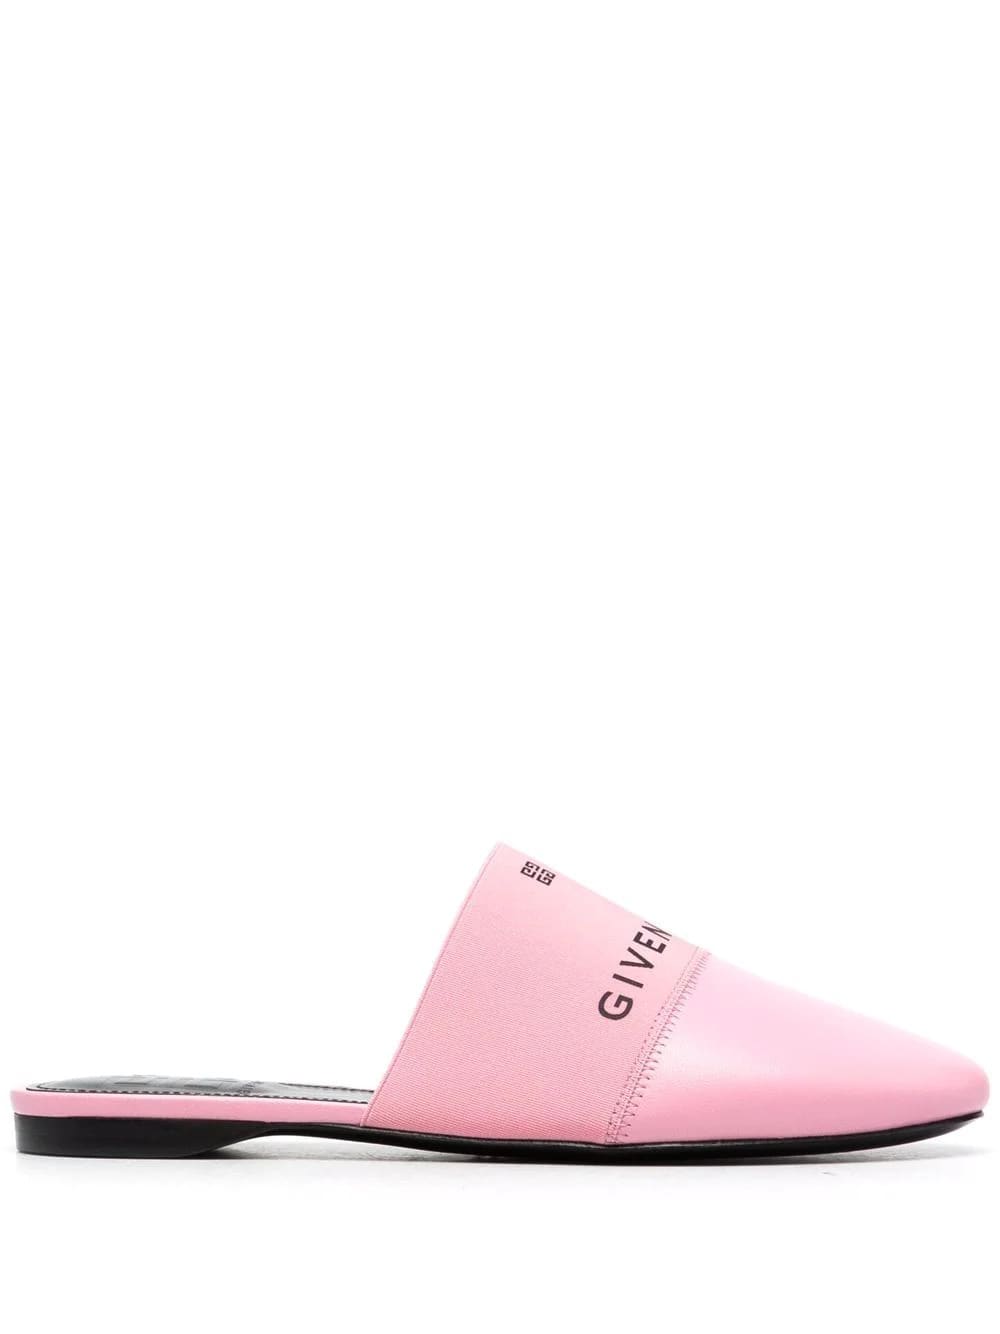 Givenchy Woman 4g Flat Mules In Pink Leather